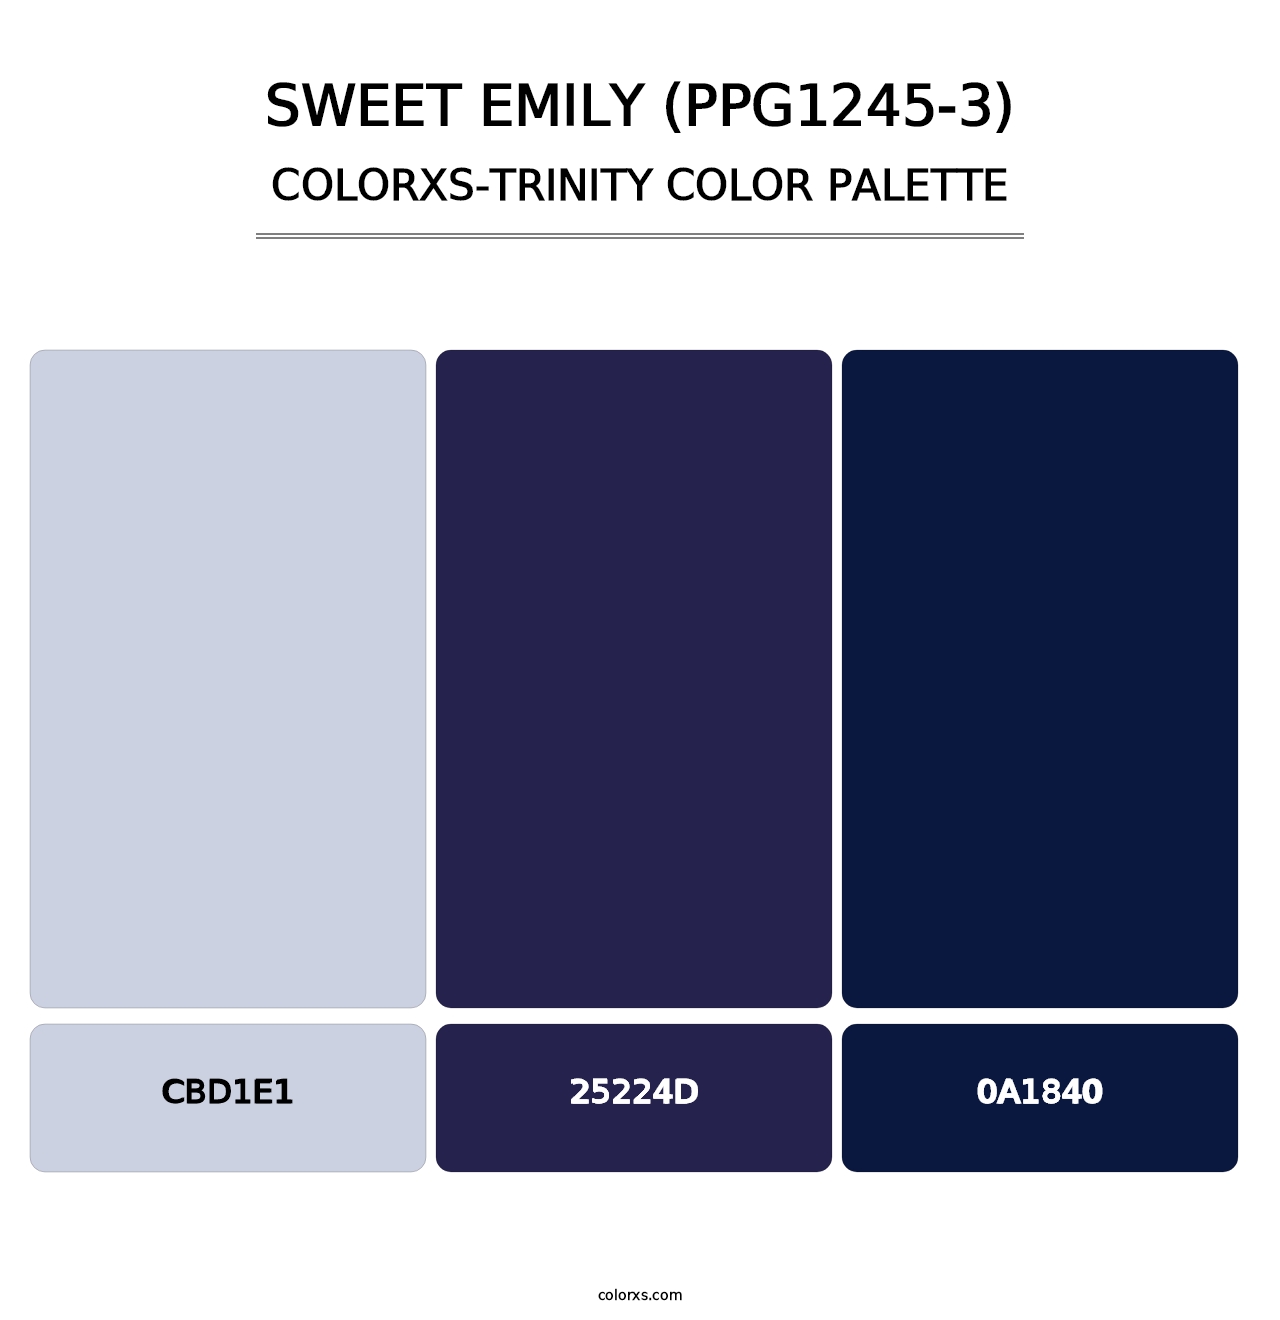 Sweet Emily (PPG1245-3) - Colorxs Trinity Palette